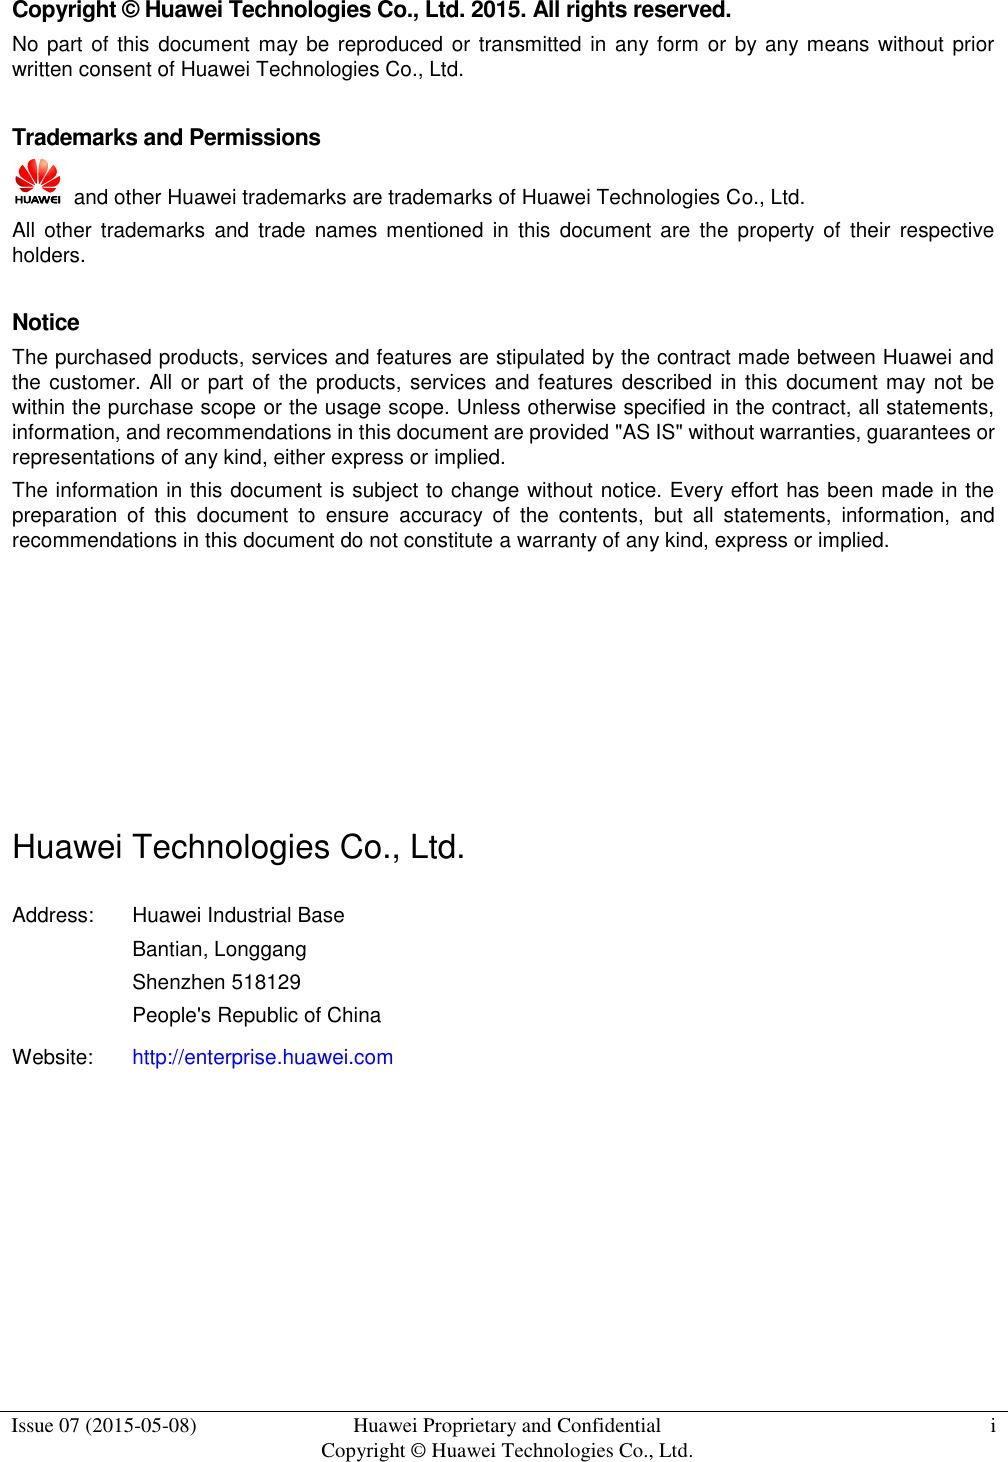  Issue 07 (2015-05-08) Huawei Proprietary and Confidential           Copyright © Huawei Technologies Co., Ltd. i  Copyright © Huawei Technologies Co., Ltd. 2015. All rights reserved. No part of this  document  may be reproduced or transmitted in any form or by any means without prior written consent of Huawei Technologies Co., Ltd.  Trademarks and Permissions   and other Huawei trademarks are trademarks of Huawei Technologies Co., Ltd. All  other  trademarks  and  trade  names  mentioned  in  this  document  are  the  property  of  their  respective holders.  Notice The purchased products, services and features are stipulated by the contract made between Huawei and the customer.  All or part of the products, services and features described in this document may not be within the purchase scope or the usage scope. Unless otherwise specified in the contract, all statements, information, and recommendations in this document are provided &quot;AS IS&quot; without warranties, guarantees or representations of any kind, either express or implied. The information in this document is subject to change without notice. Every effort has been made in the preparation  of  this  document  to  ensure  accuracy  of  the  contents,  but  all  statements,  information,  and recommendations in this document do not constitute a warranty of any kind, express or implied.       Huawei Technologies Co., Ltd. Address: Huawei Industrial Base Bantian, Longgang Shenzhen 518129 People&apos;s Republic of China Website: http://enterprise.huawei.com    